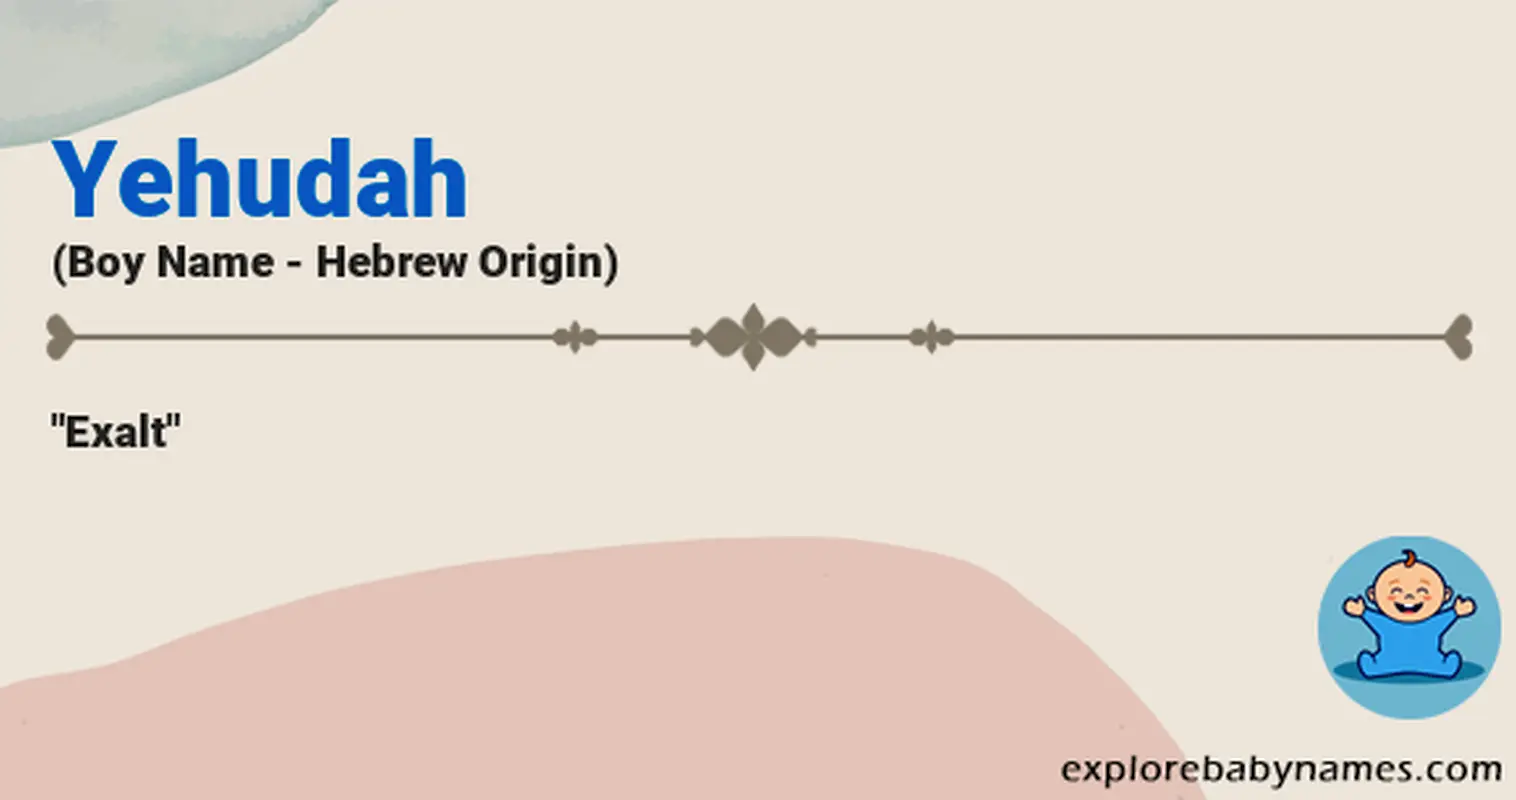 Meaning of Yehudah